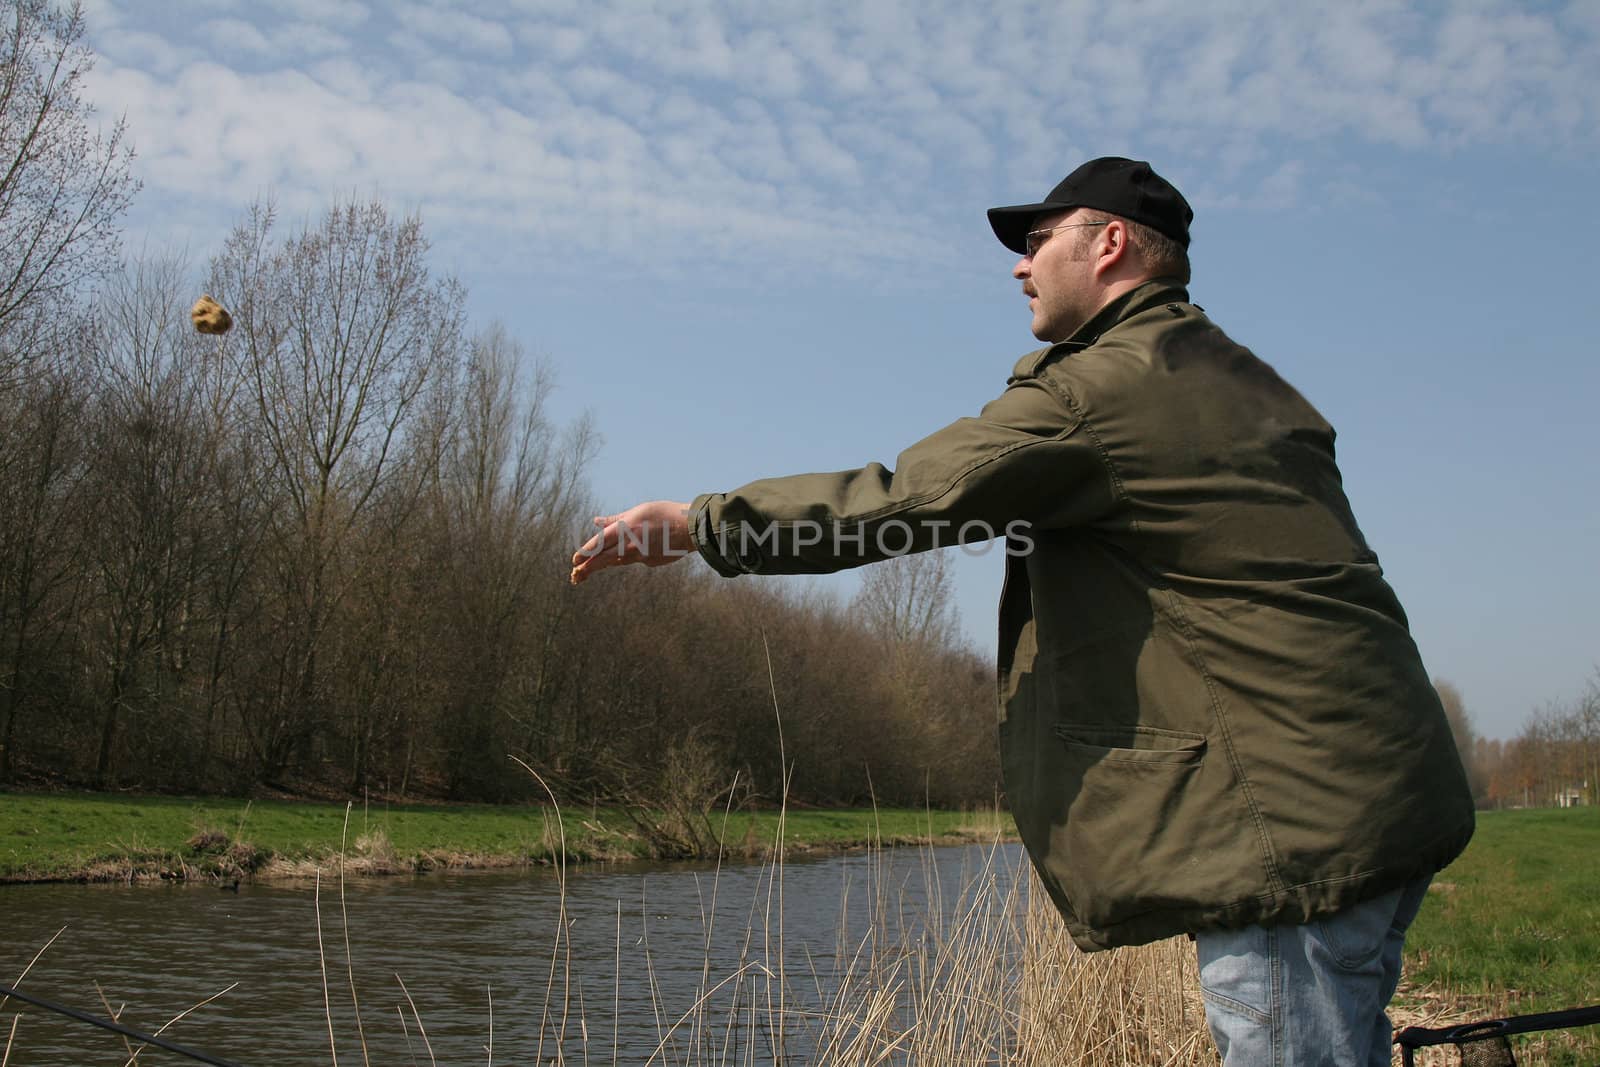 Fisherman throwing a feeding ball into the water